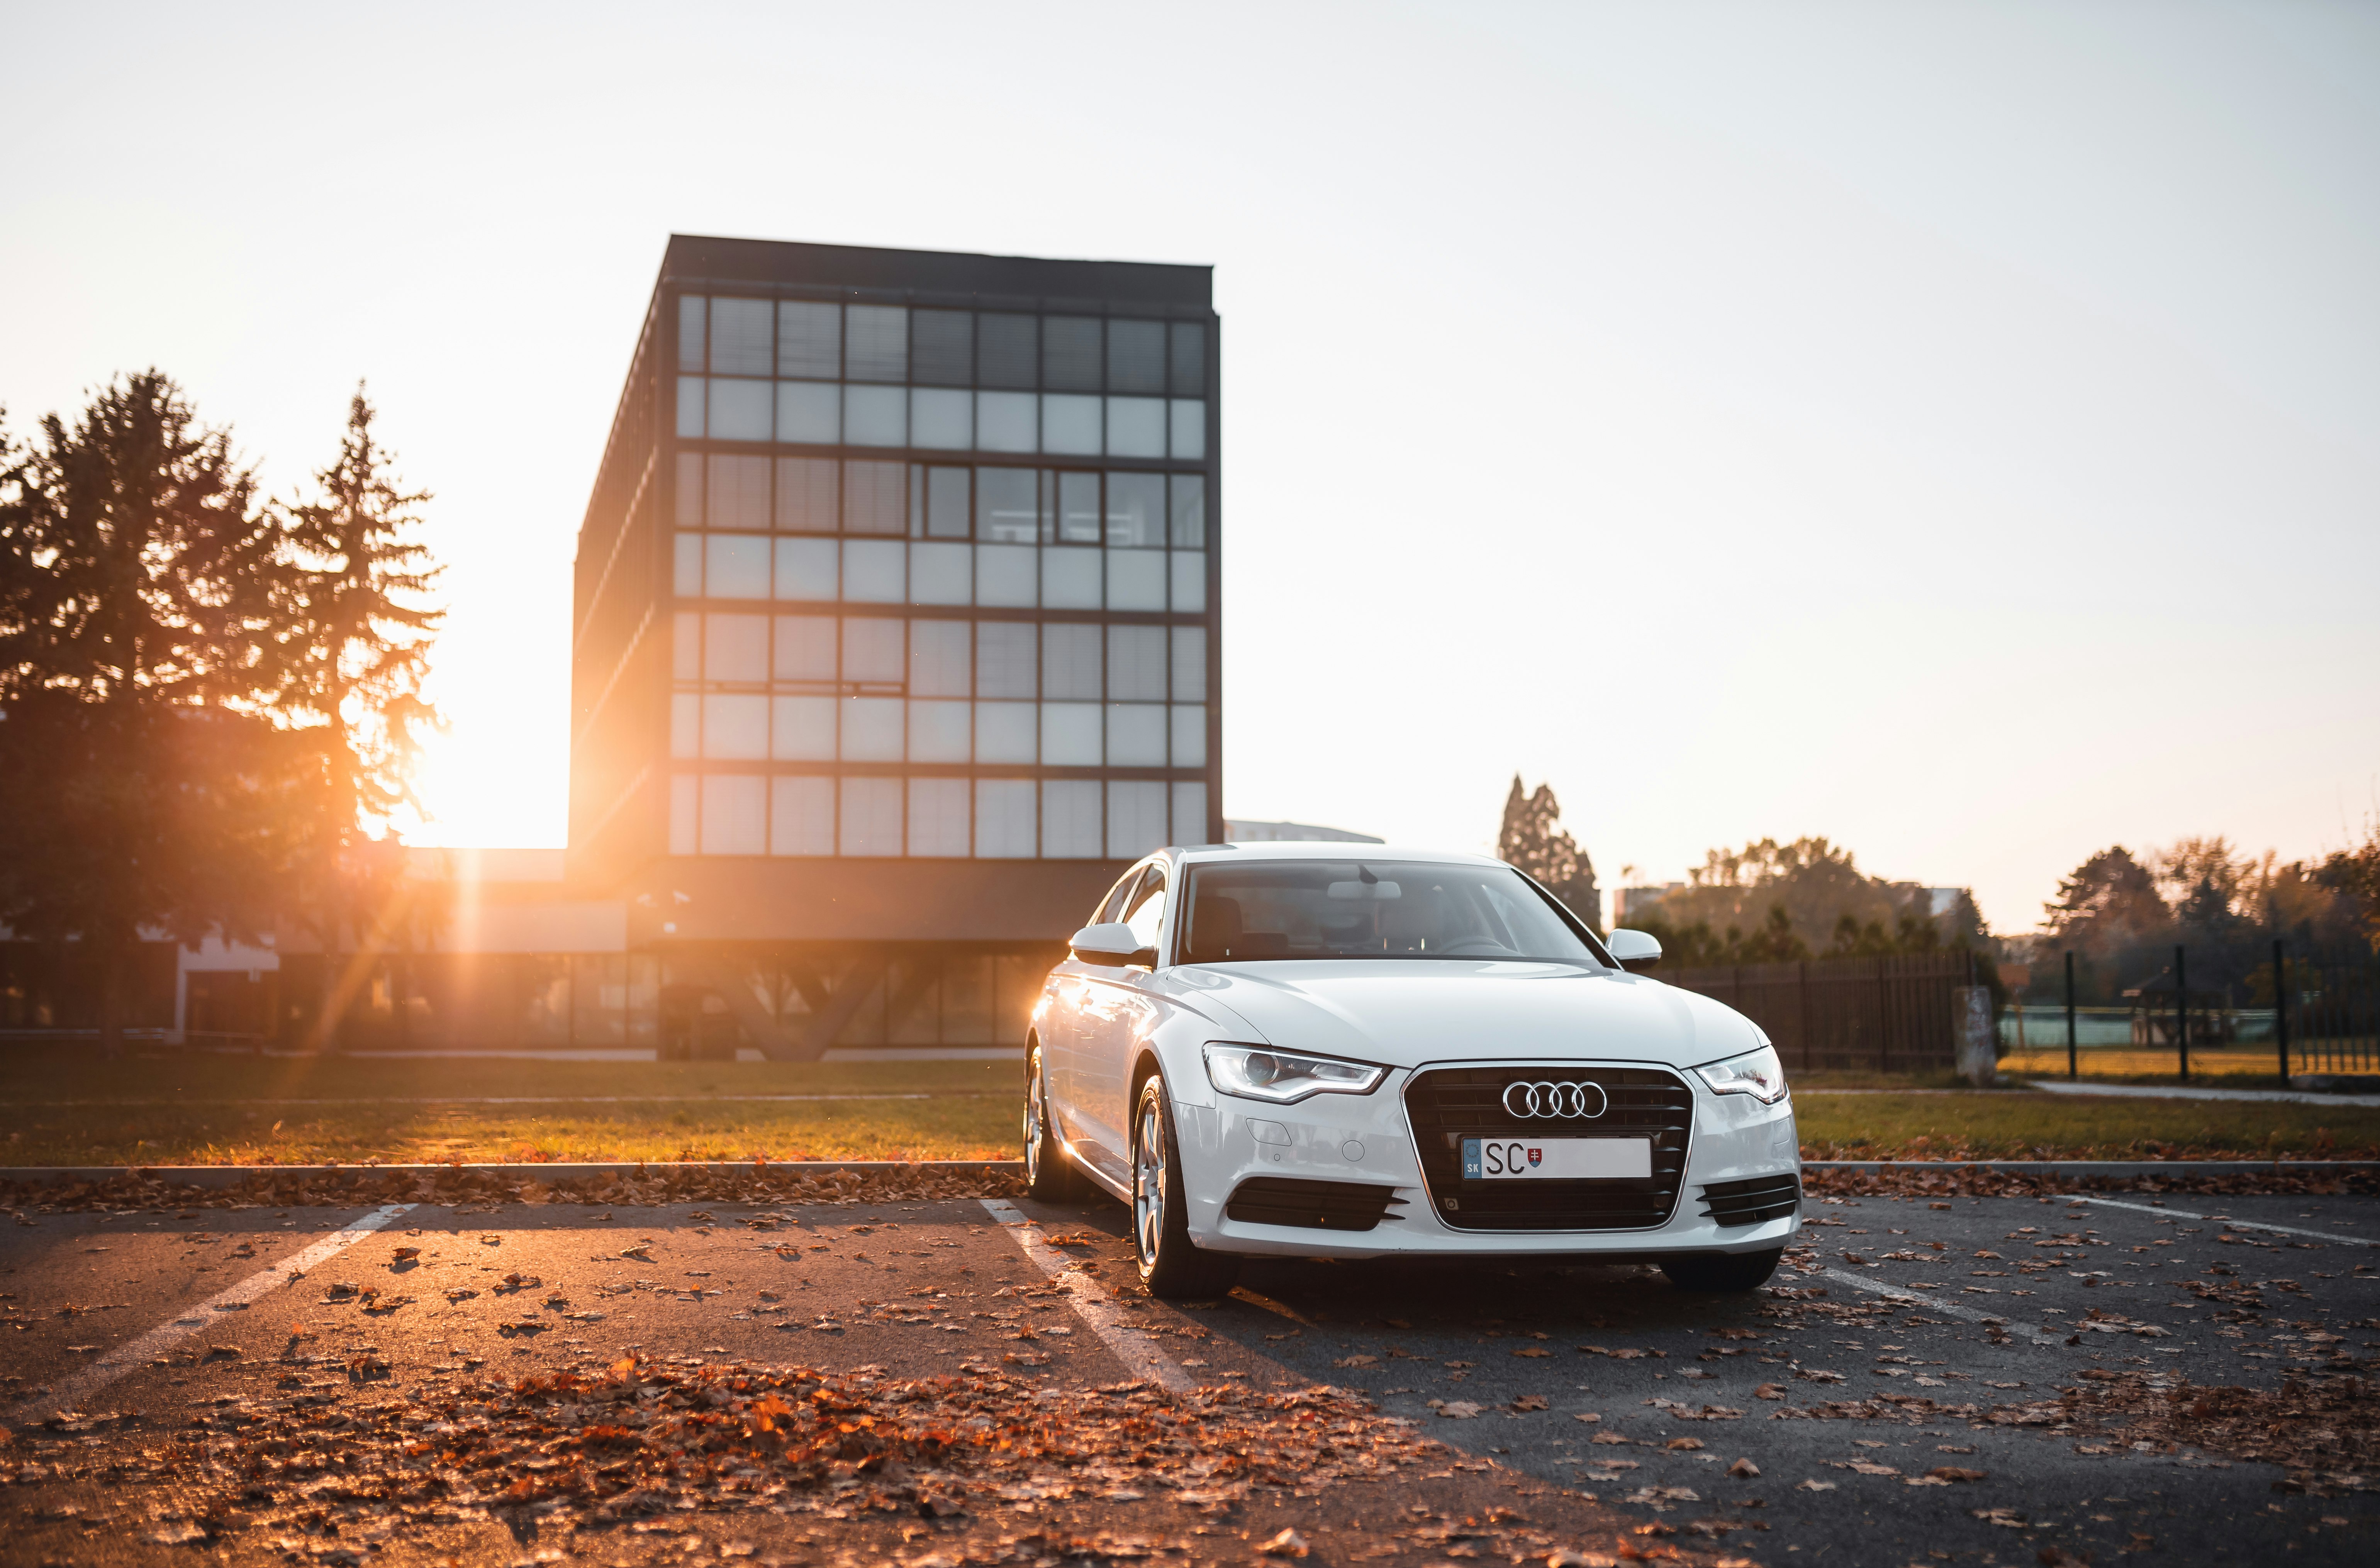 white Audi sedan parked on concrete parking area surrounded by dried leaves